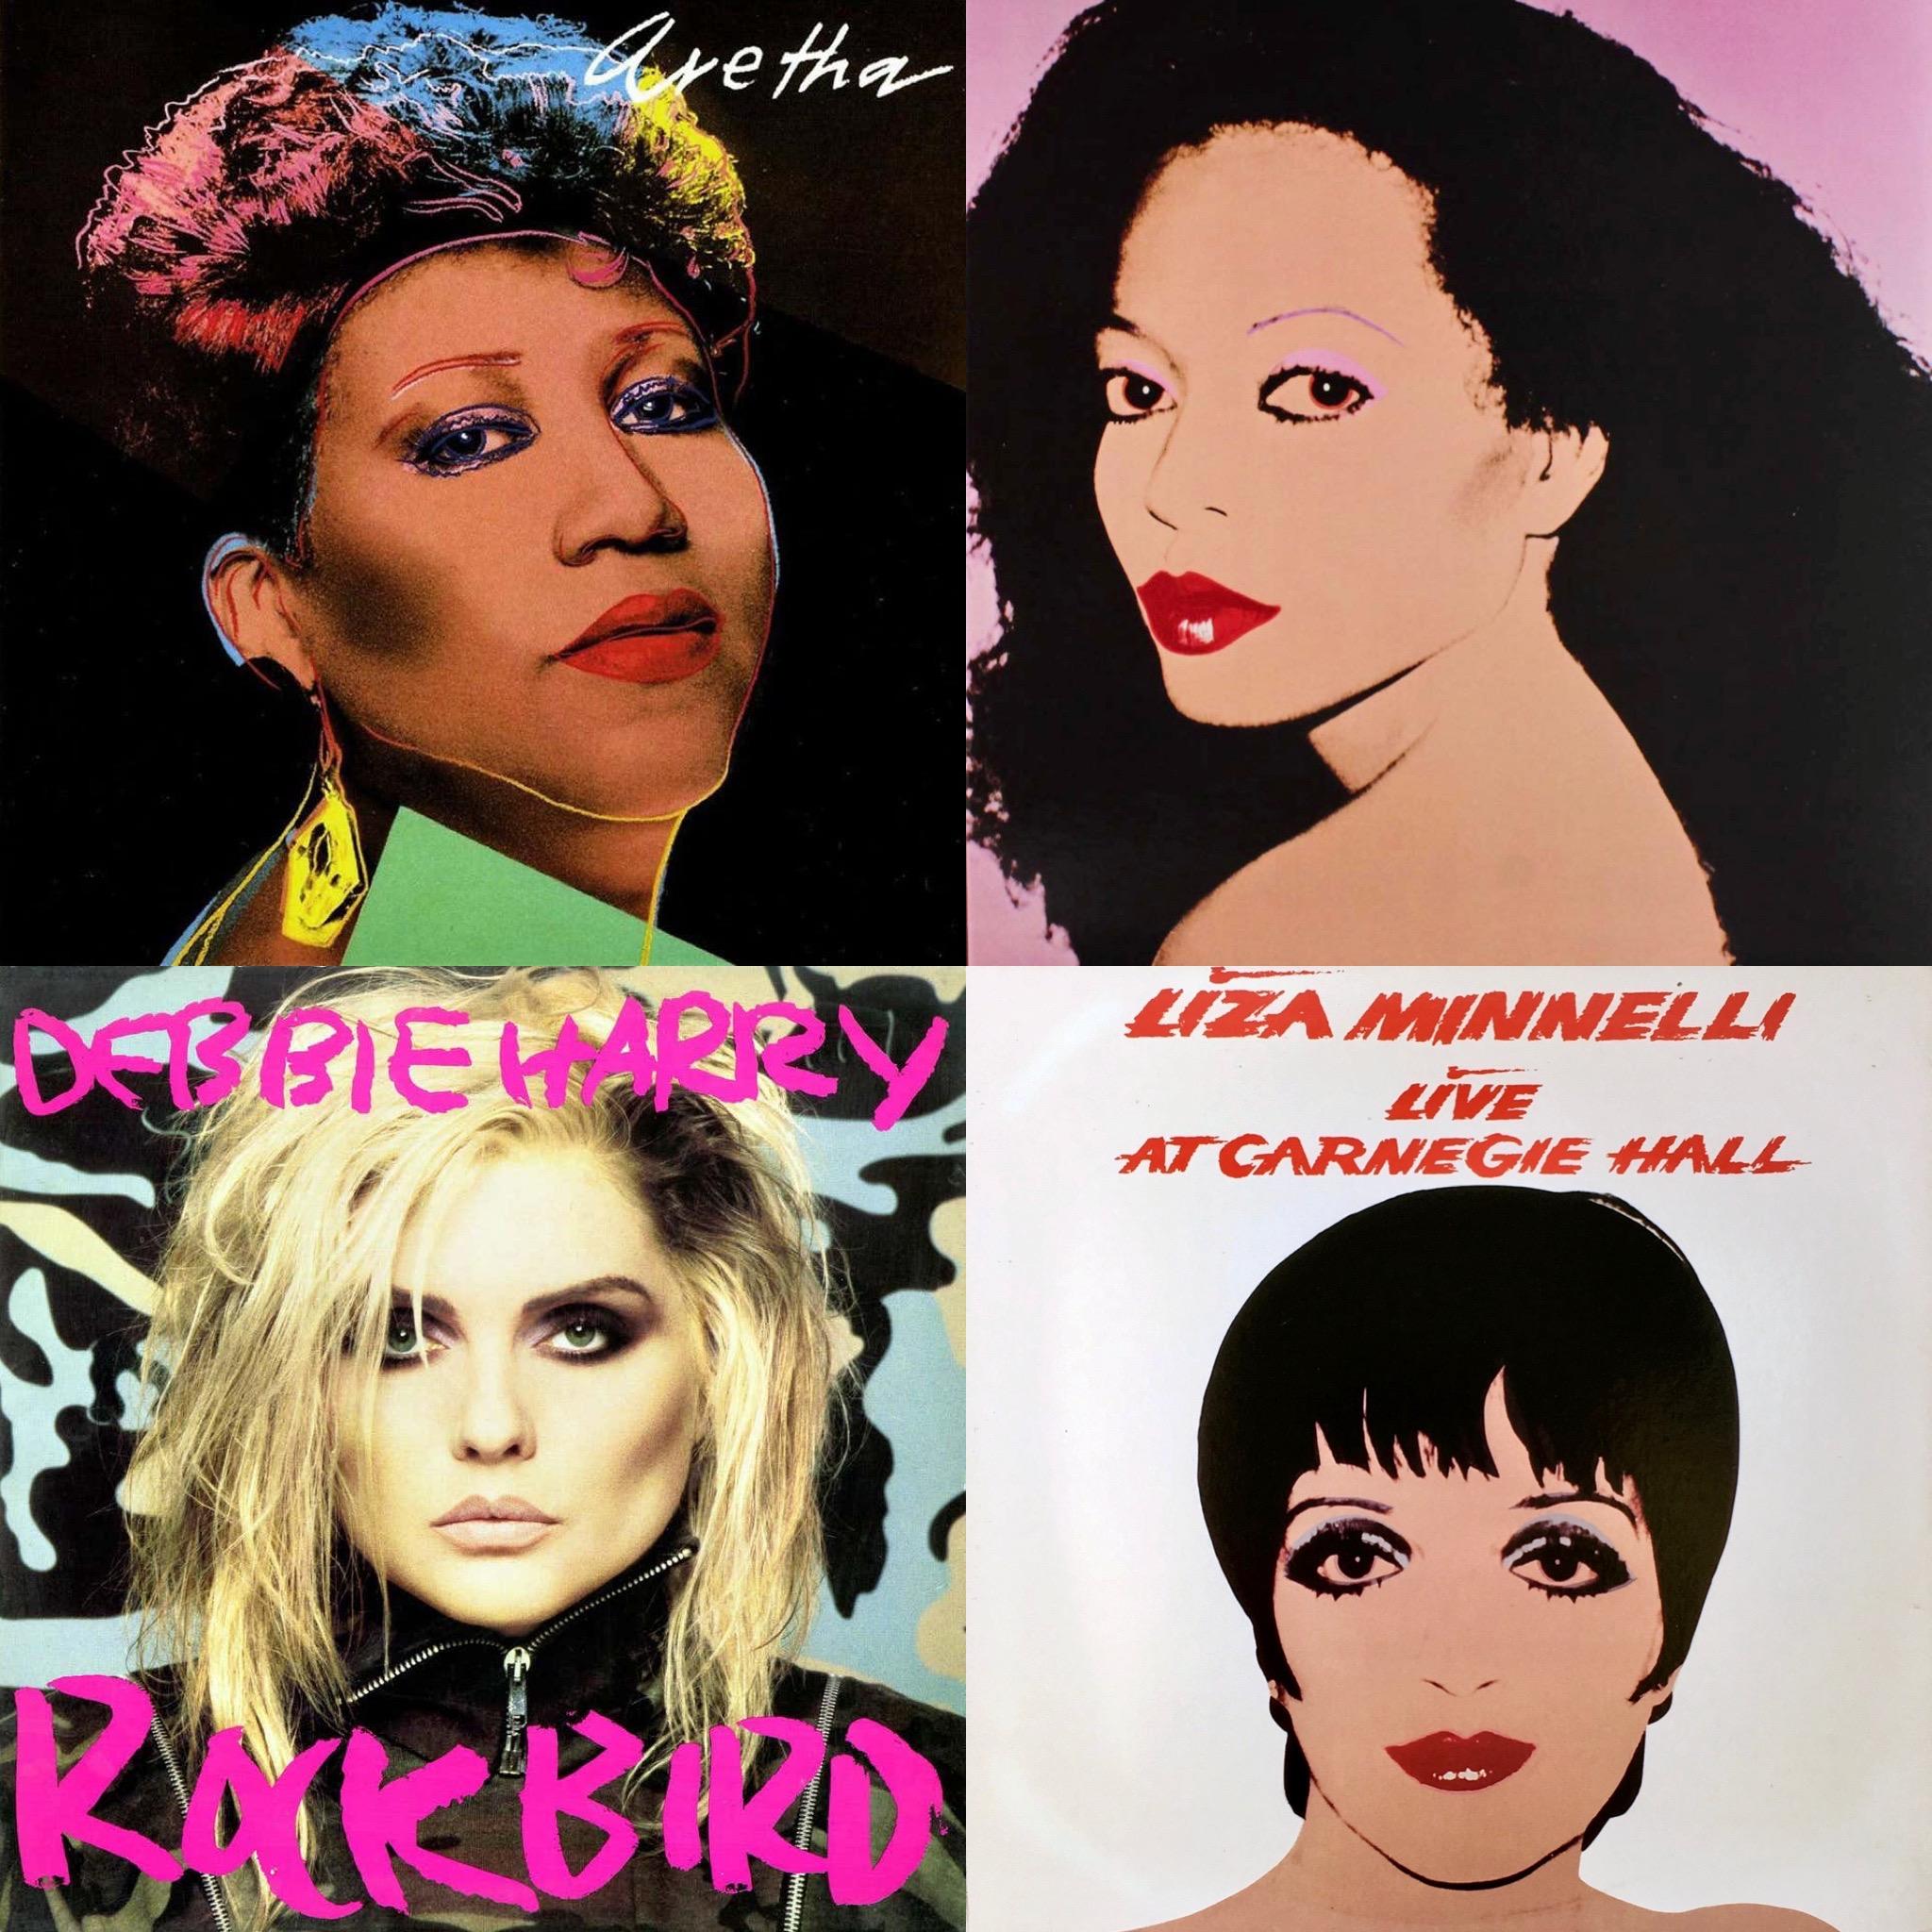 andy warhol album covers